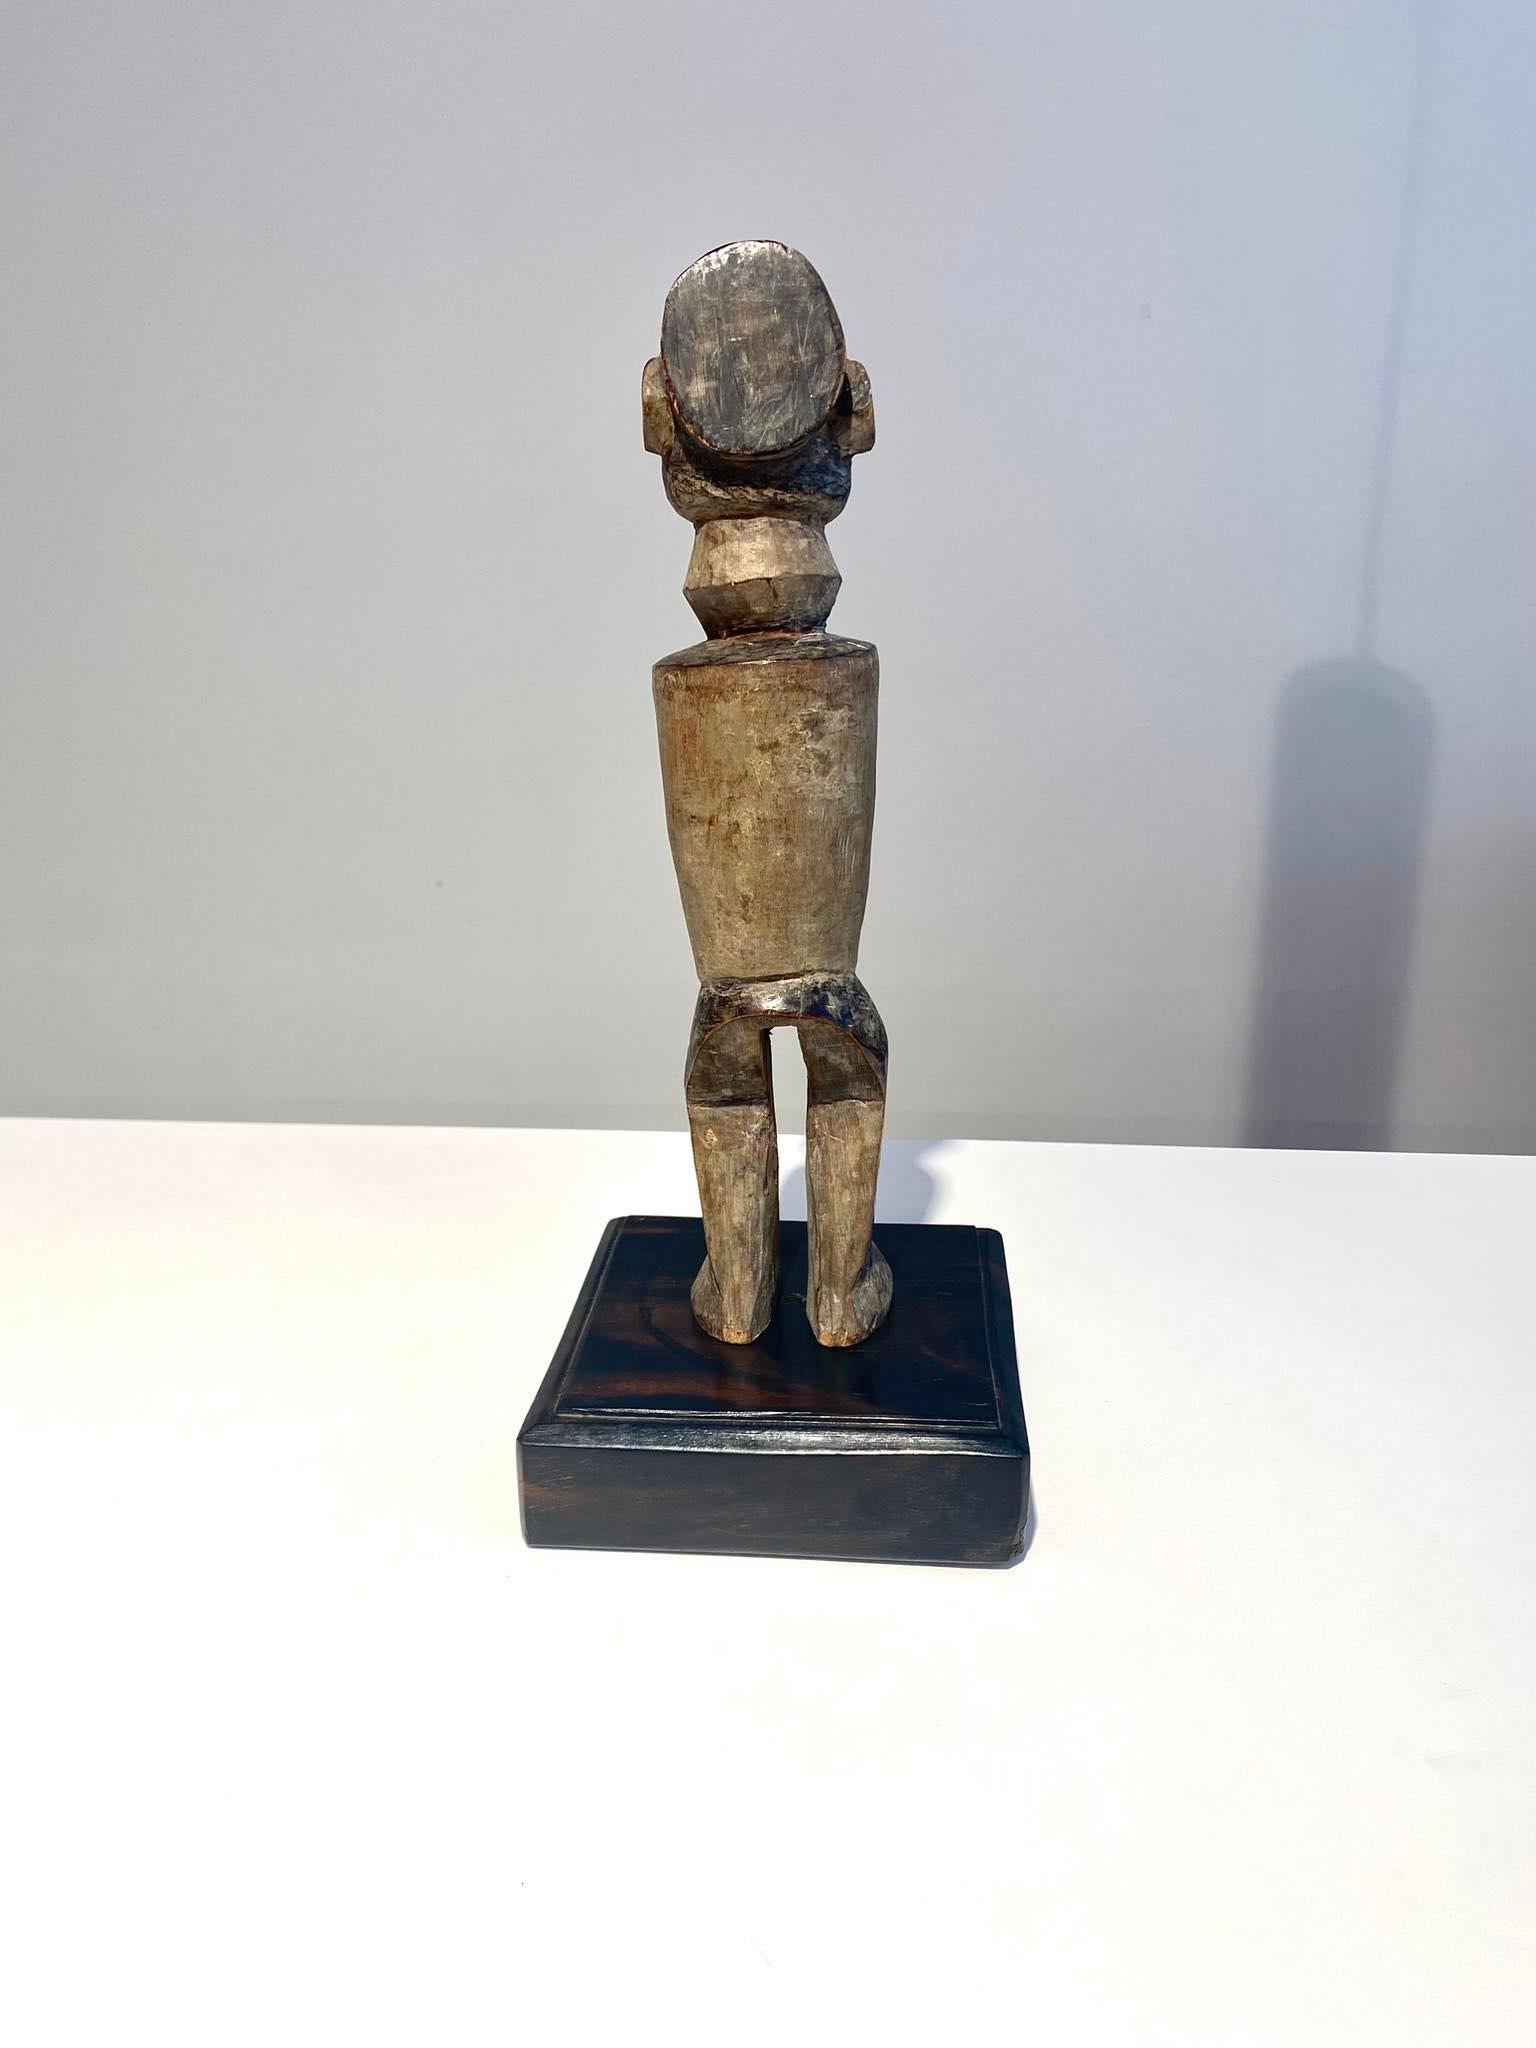 20th Century Statue Of The Teke Tribe DR Congo African Art Early 20th Malebo Pool Brazzaville For Sale